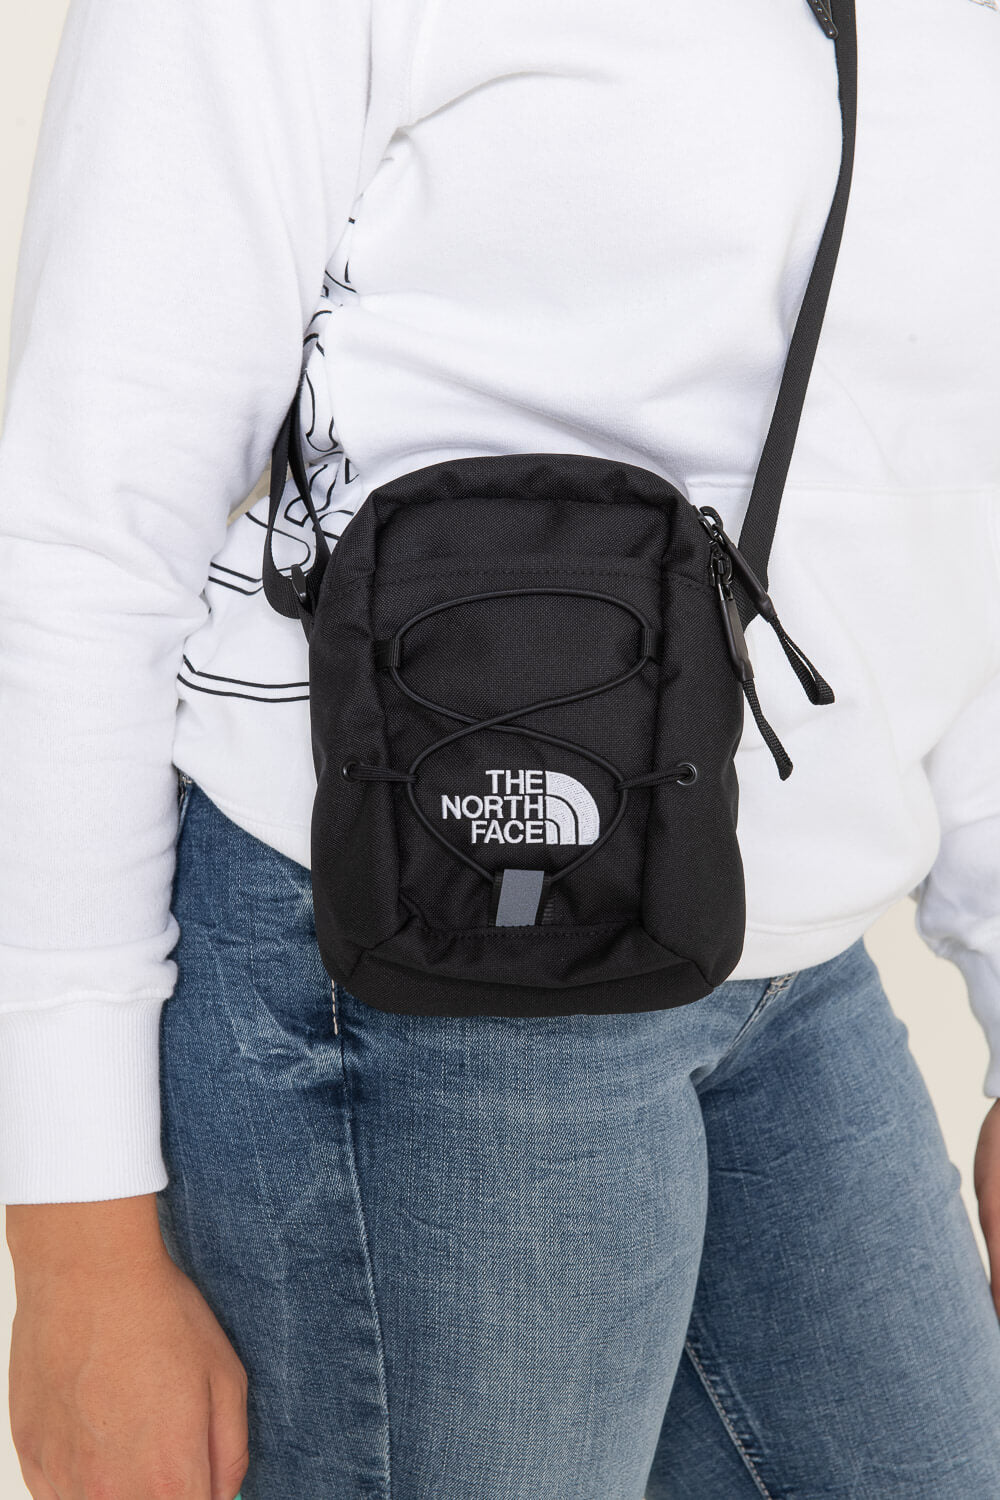 North Face Bag Water Proof | dubizzle